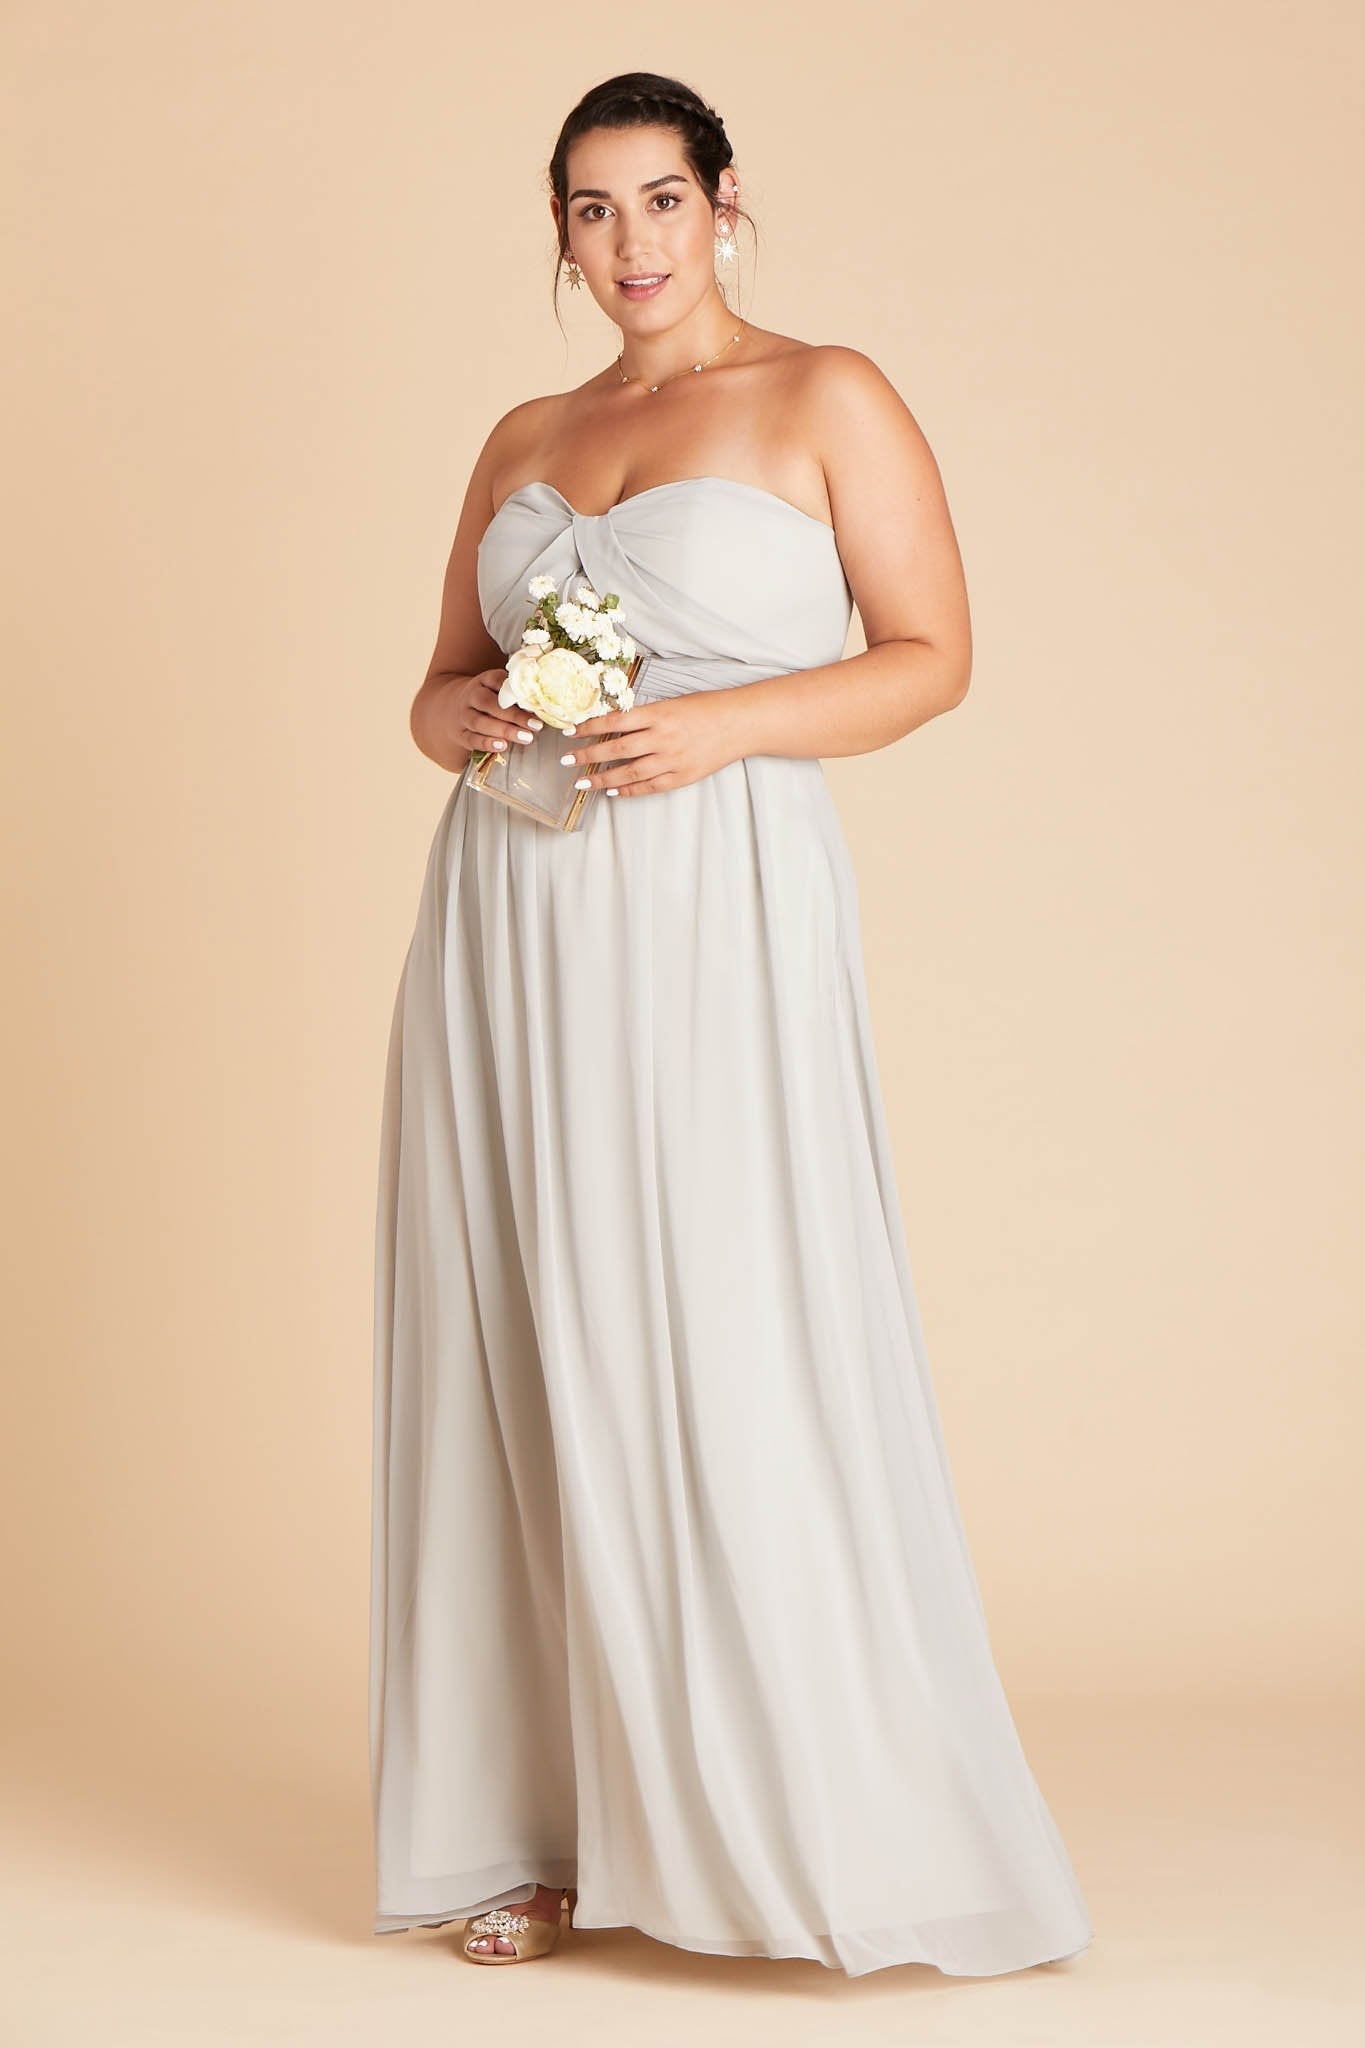 Grace convertible plus size bridesmaid dress in dove gray chiffon by Birdy Grey, side view